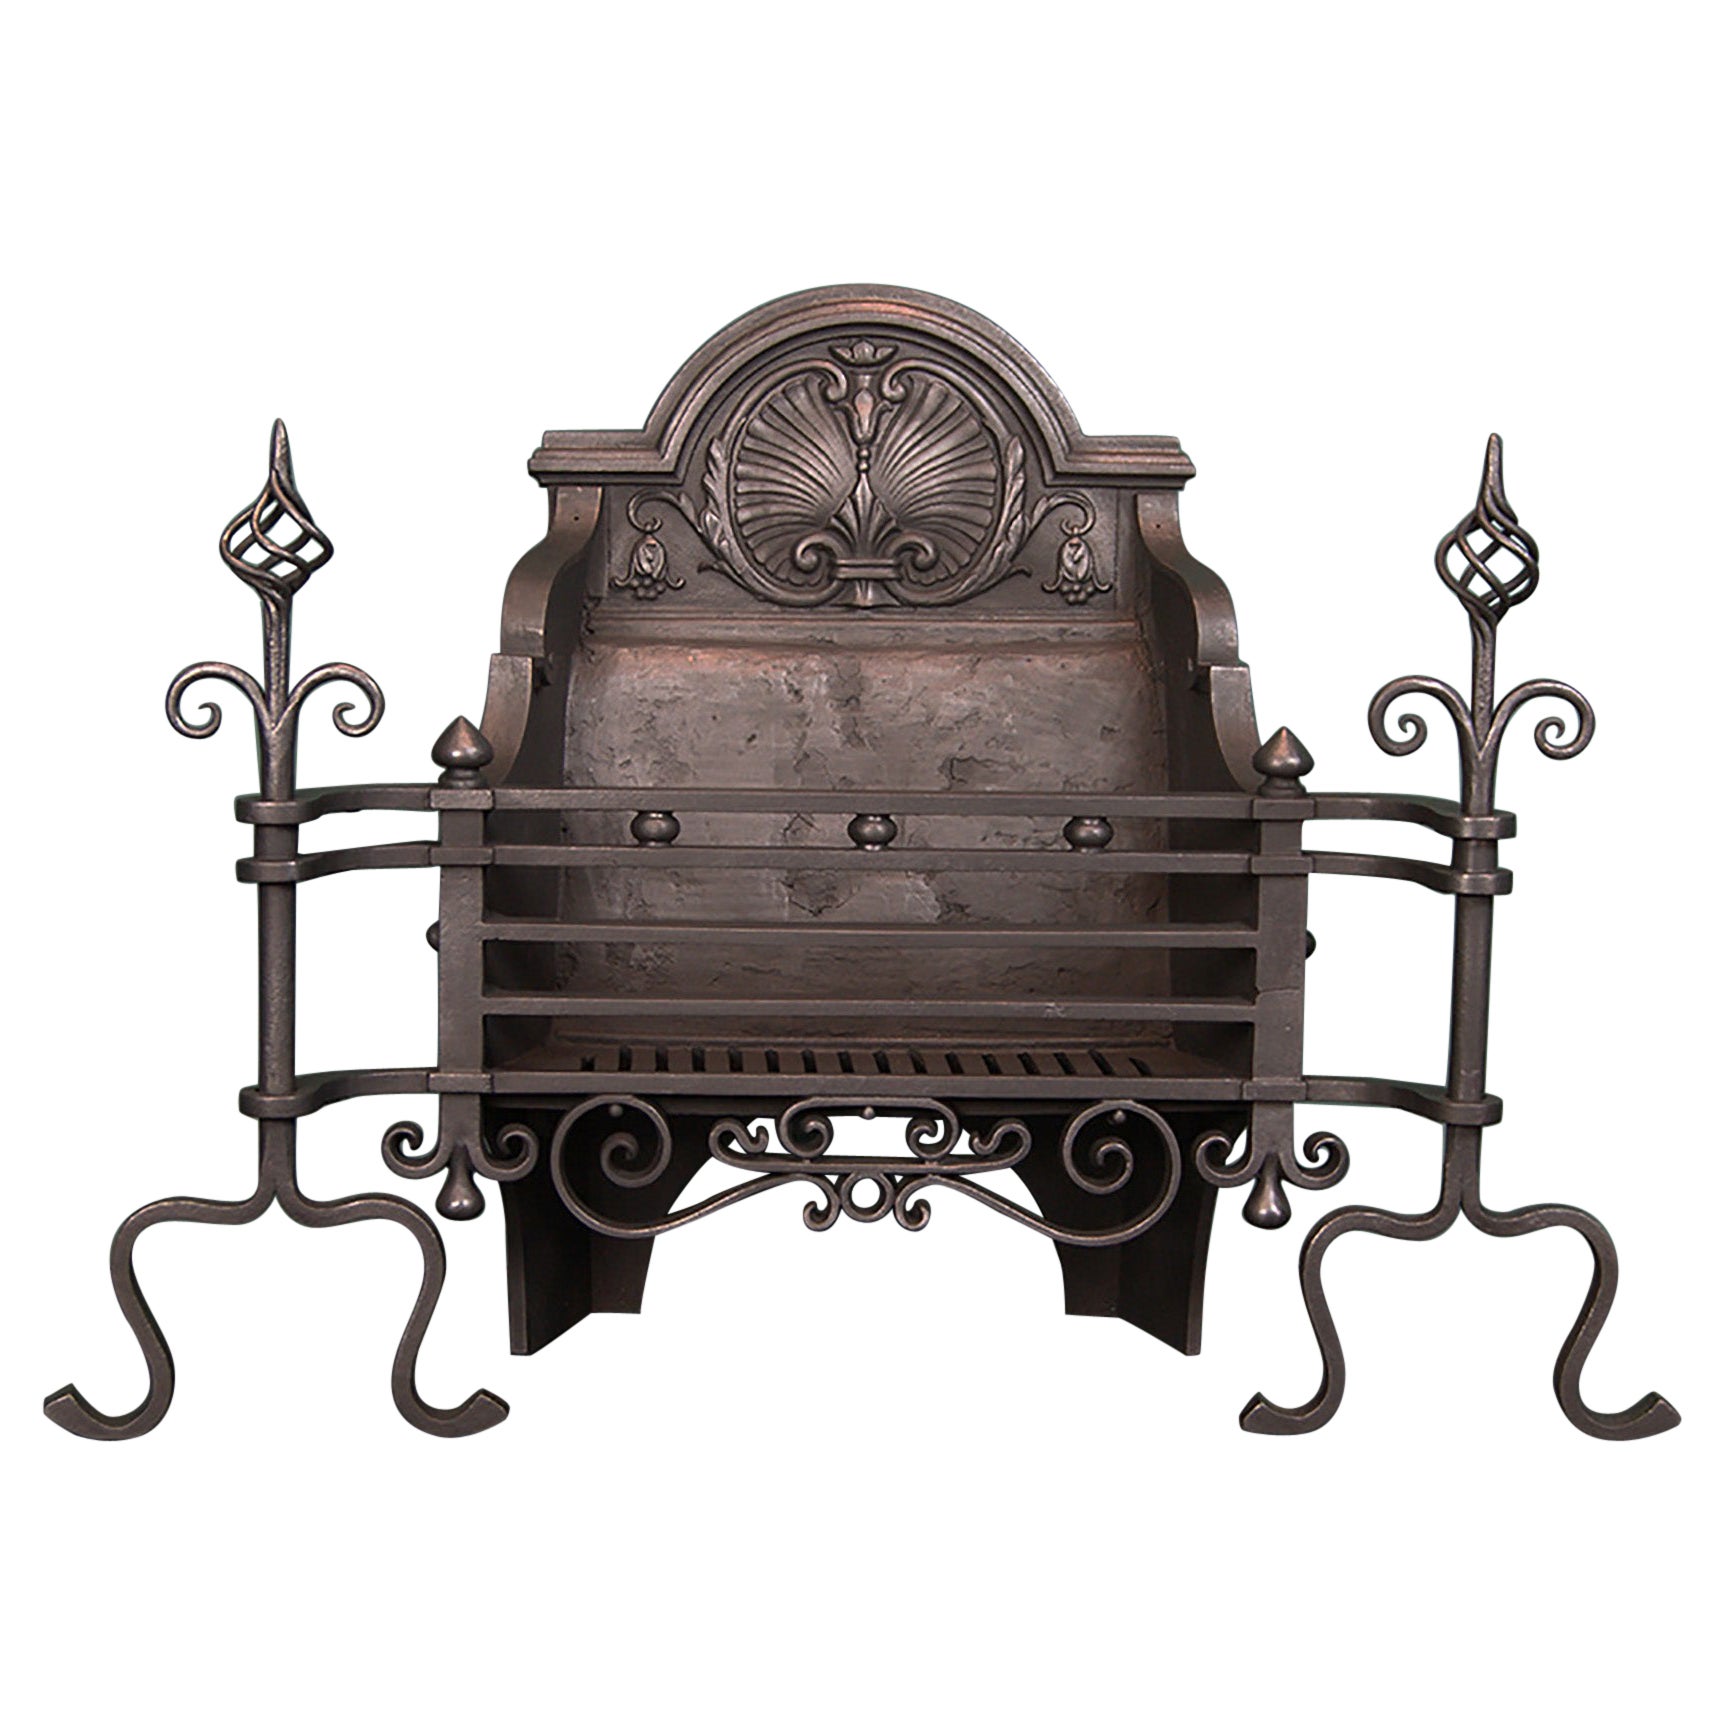 An Arts & Crafts Black Wrought Fire Grate with Shell Decoration For Sale